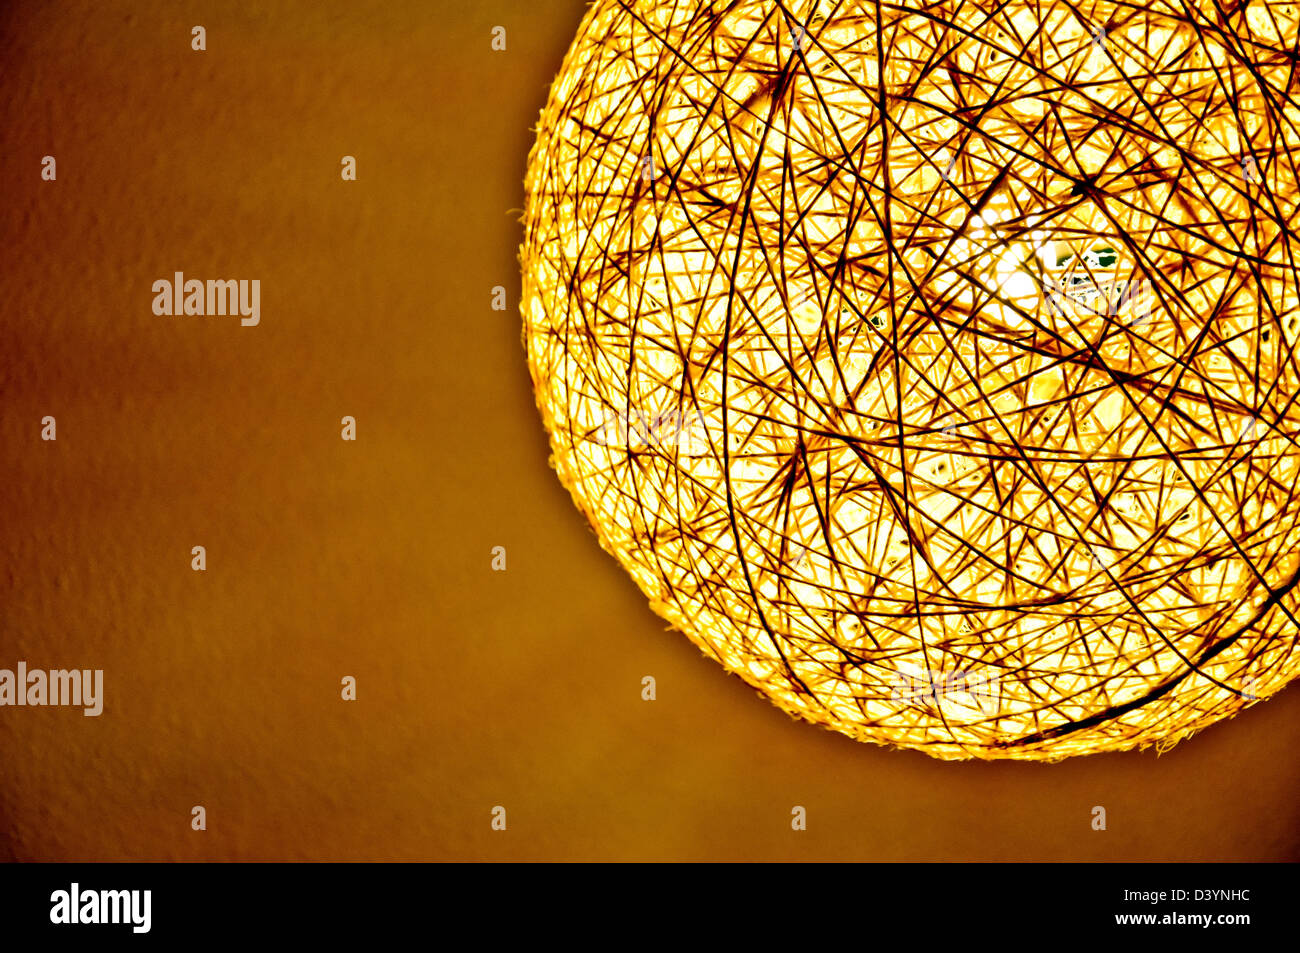 string ball lamp abstraction Stock Photo